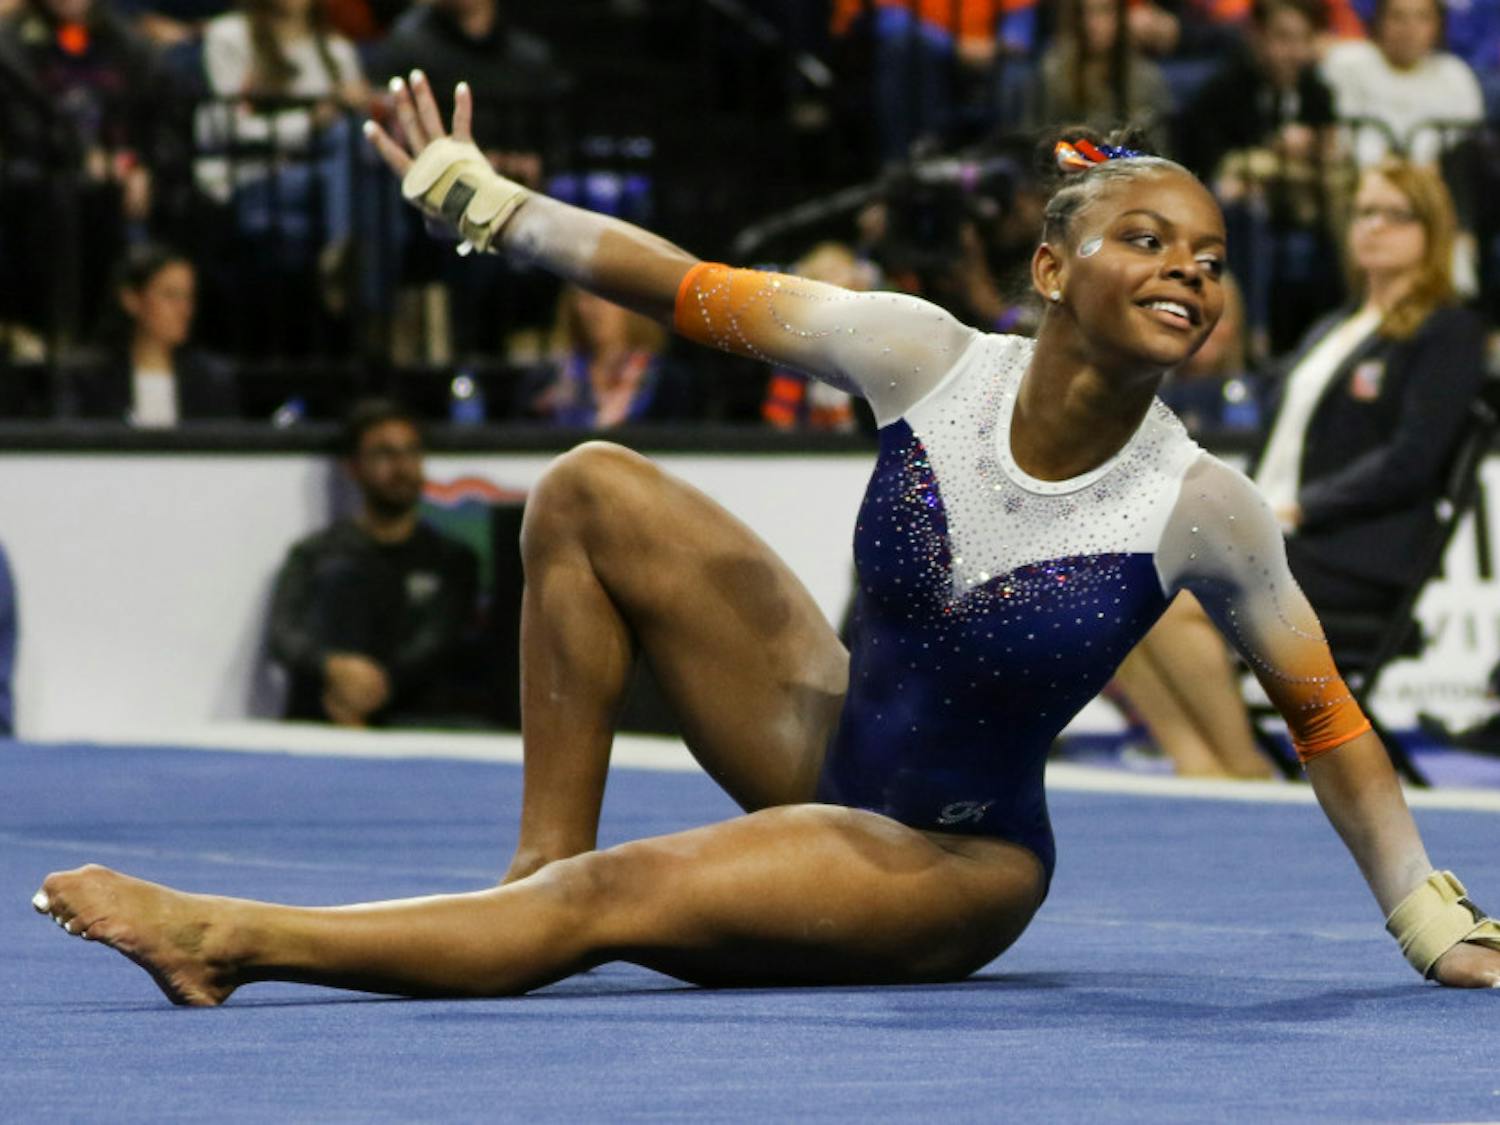 UF gymnast Trinity Thomas earned SEC Gymnast of the Week for her performance against Kentucky. She scored a 9.975 on the bars against the Wildcats. 